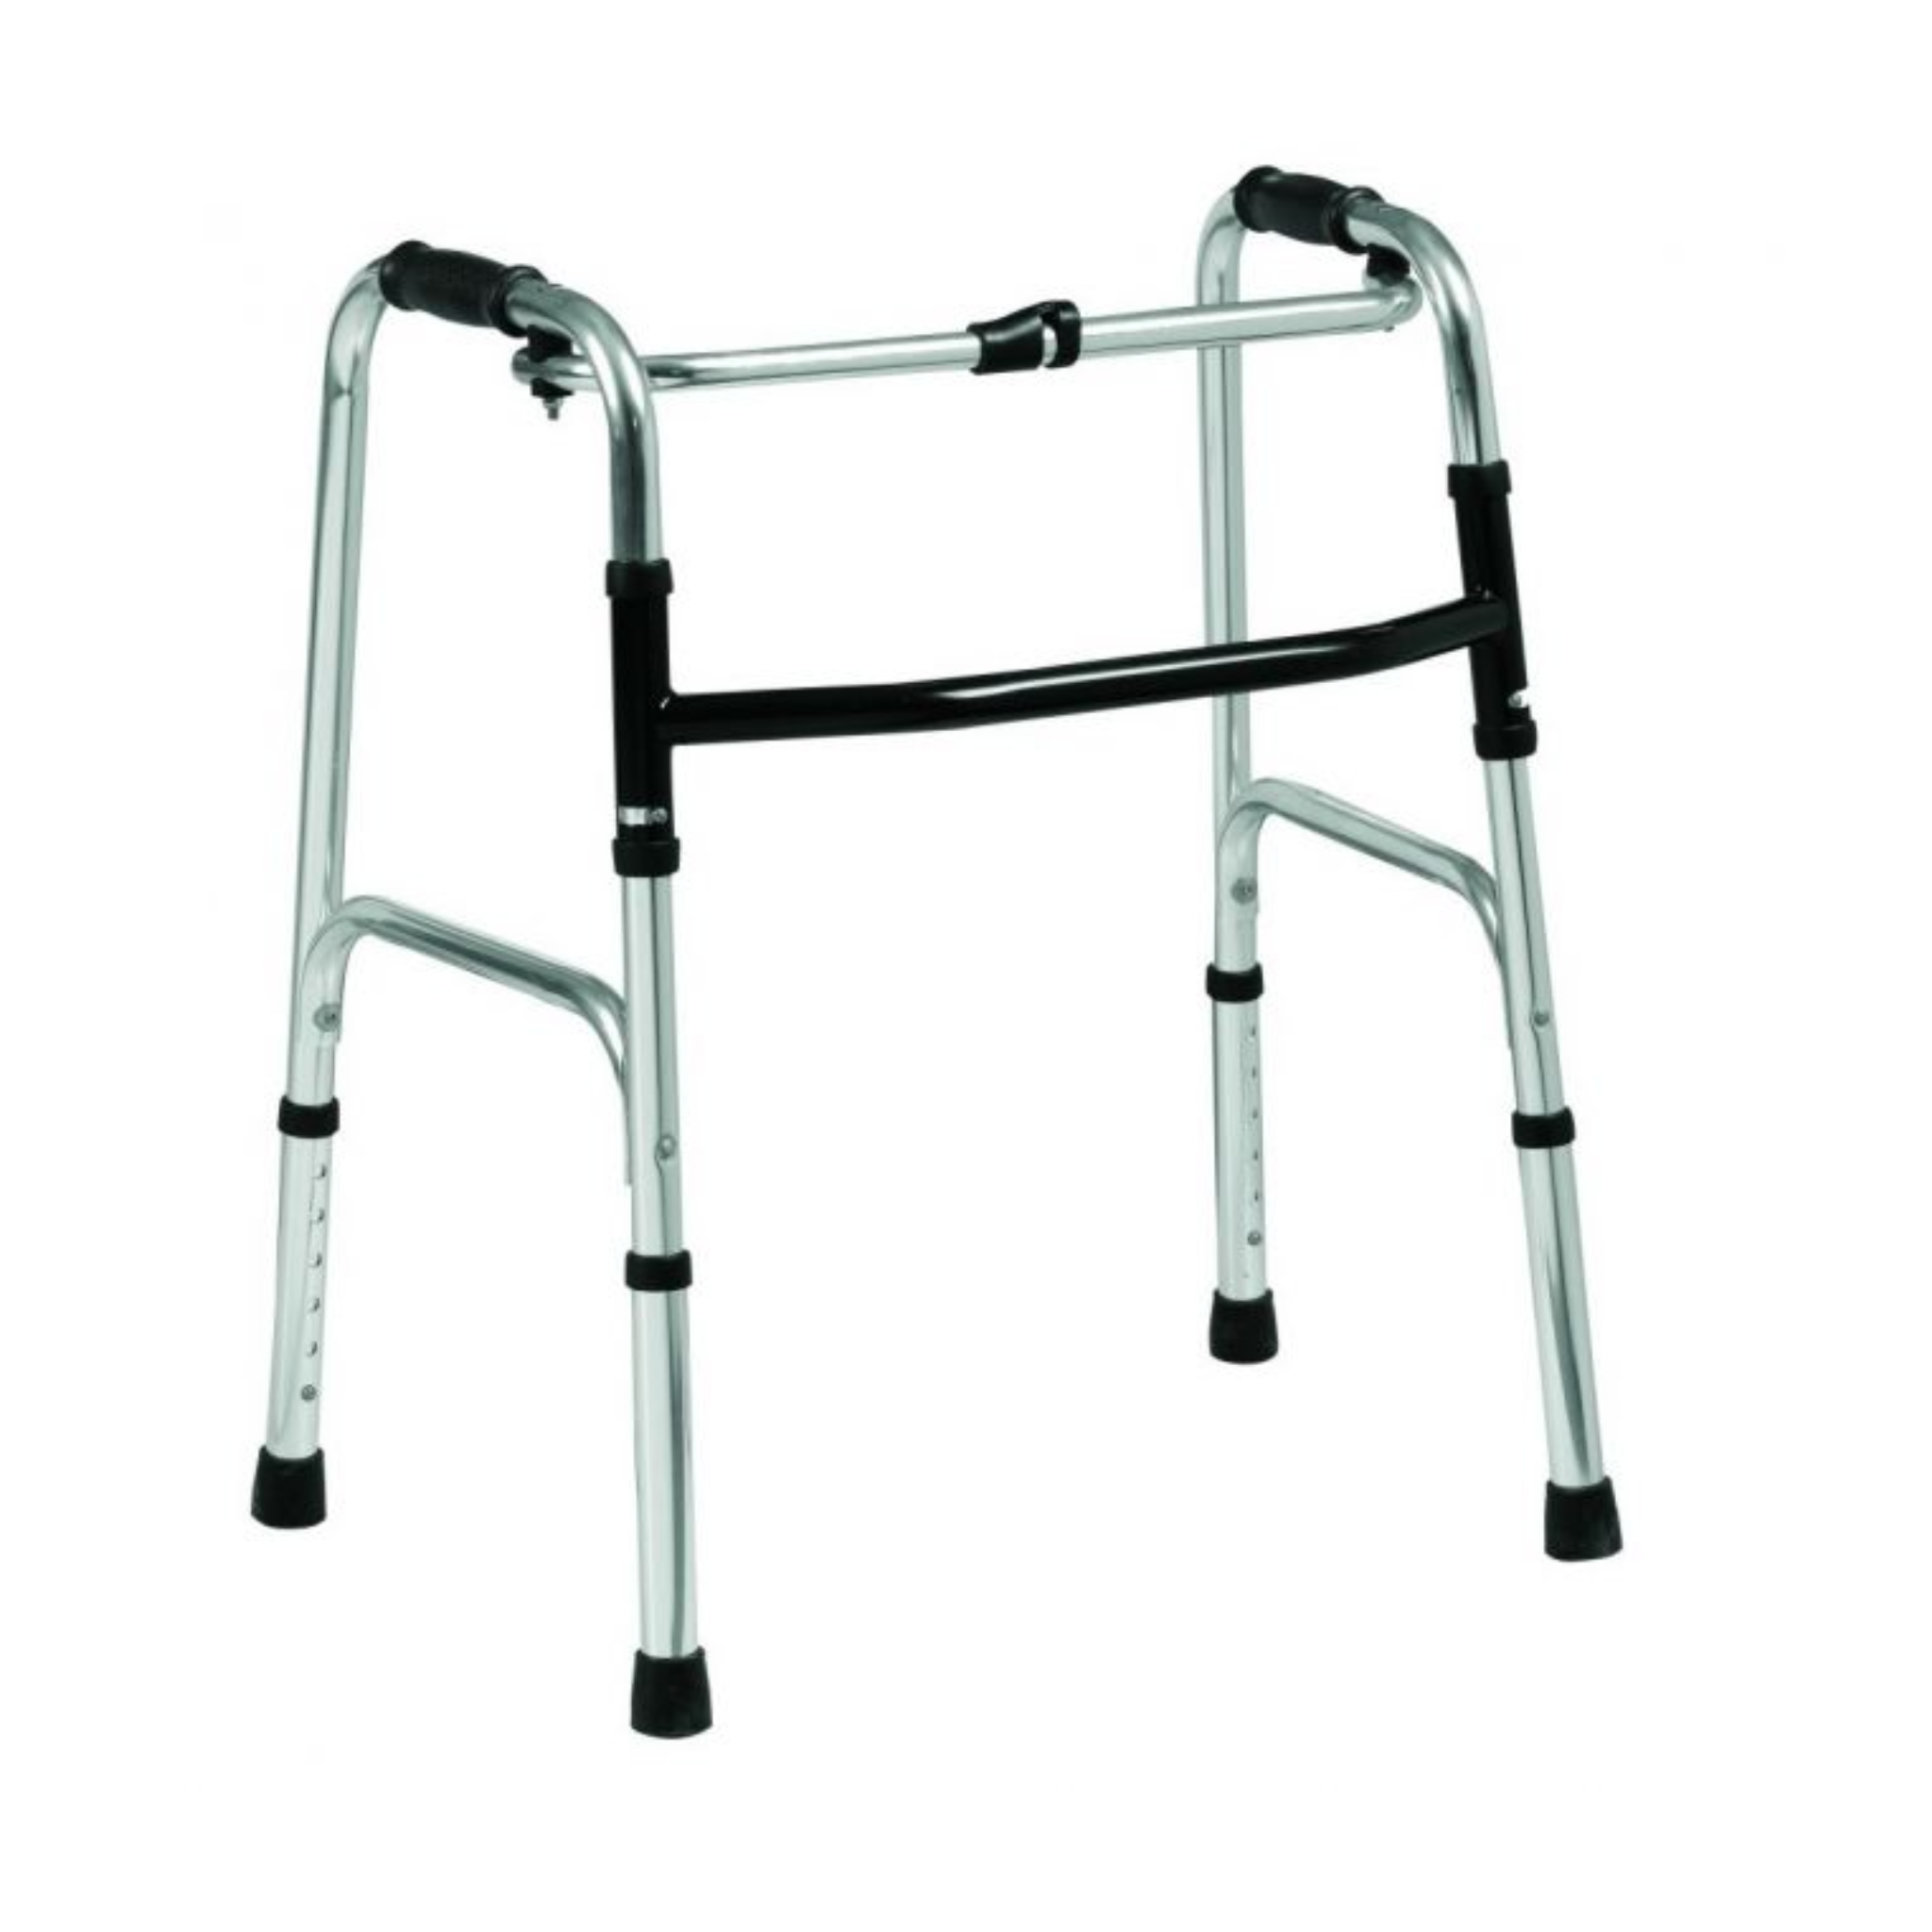 Rental - Zimmer Frame from Aged Care and Medical - Walking Frame for Rent for aged care